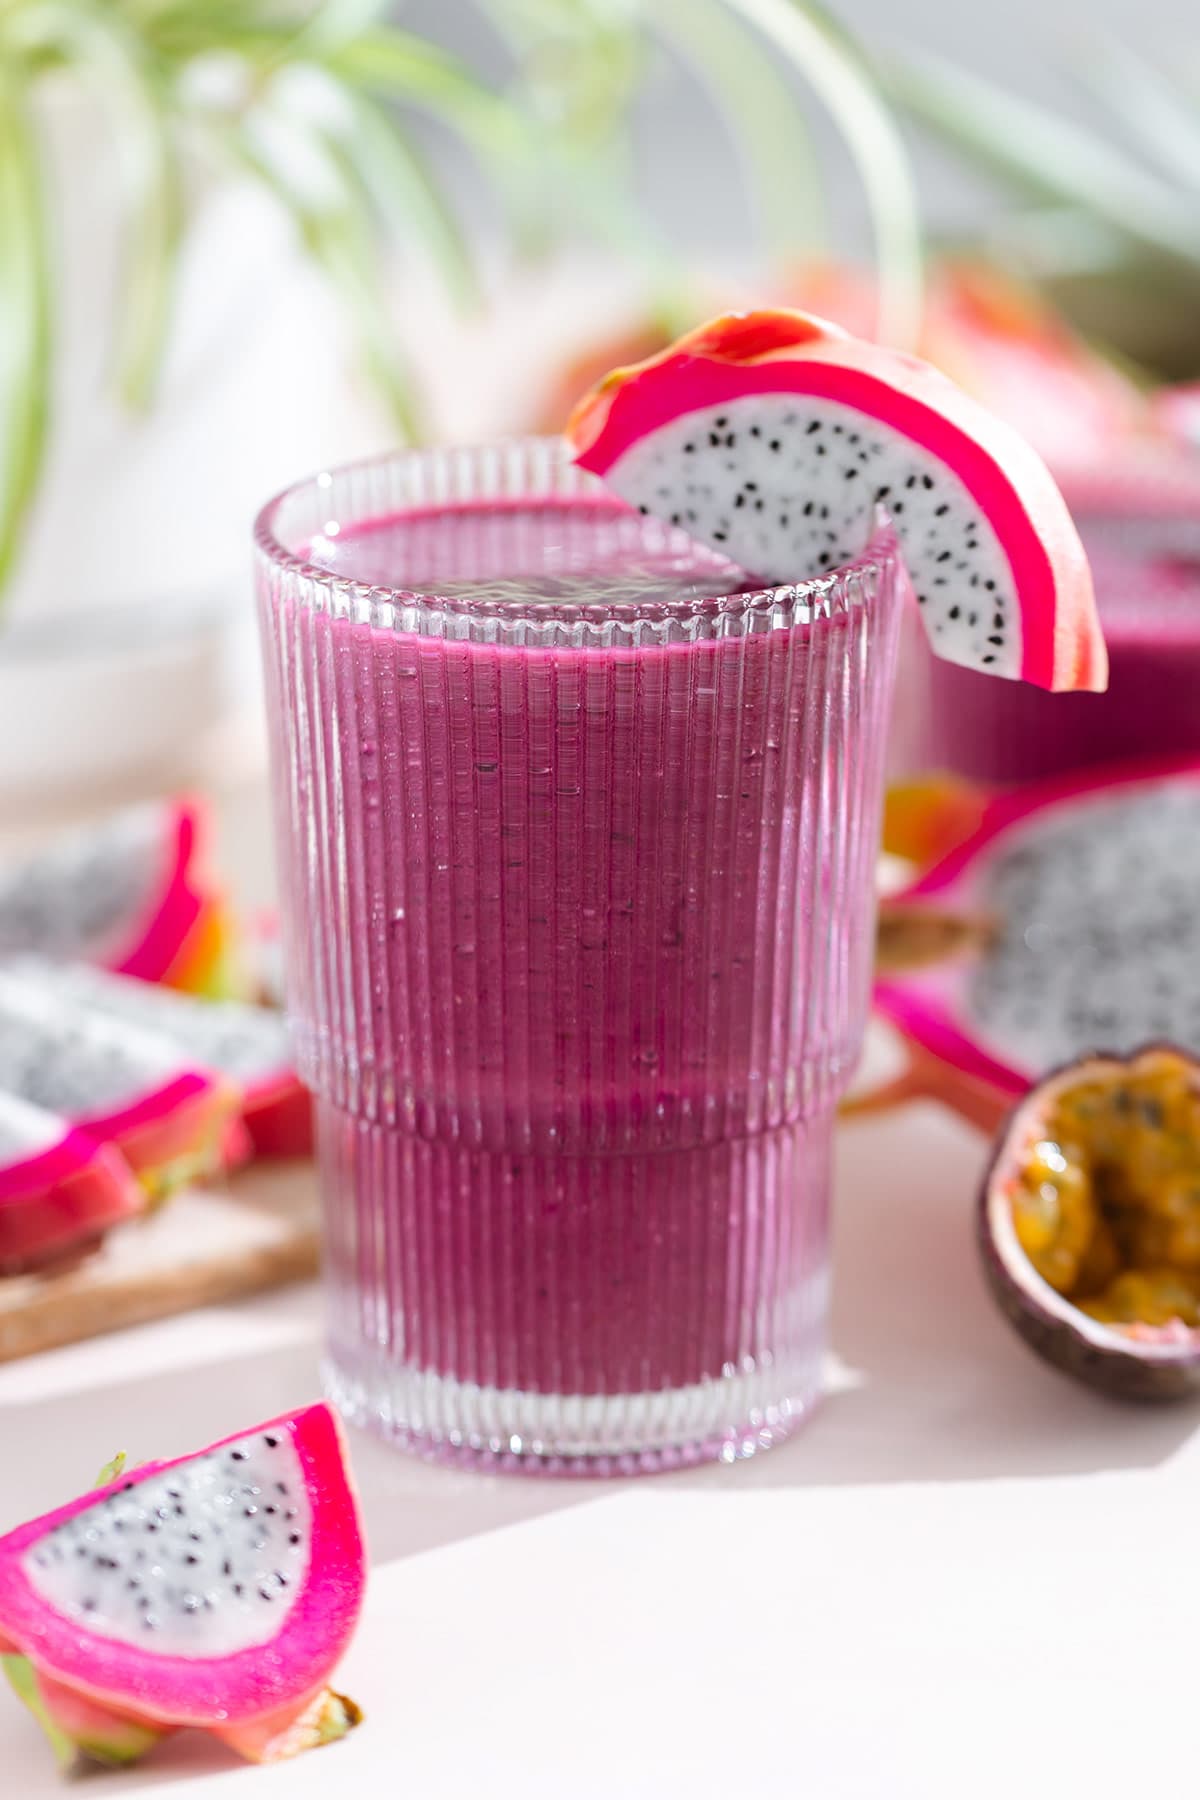 Bright purple smoothie in a tall glass garnished with white dragon fruit with more dragon fruit and passion fruit around the glass.